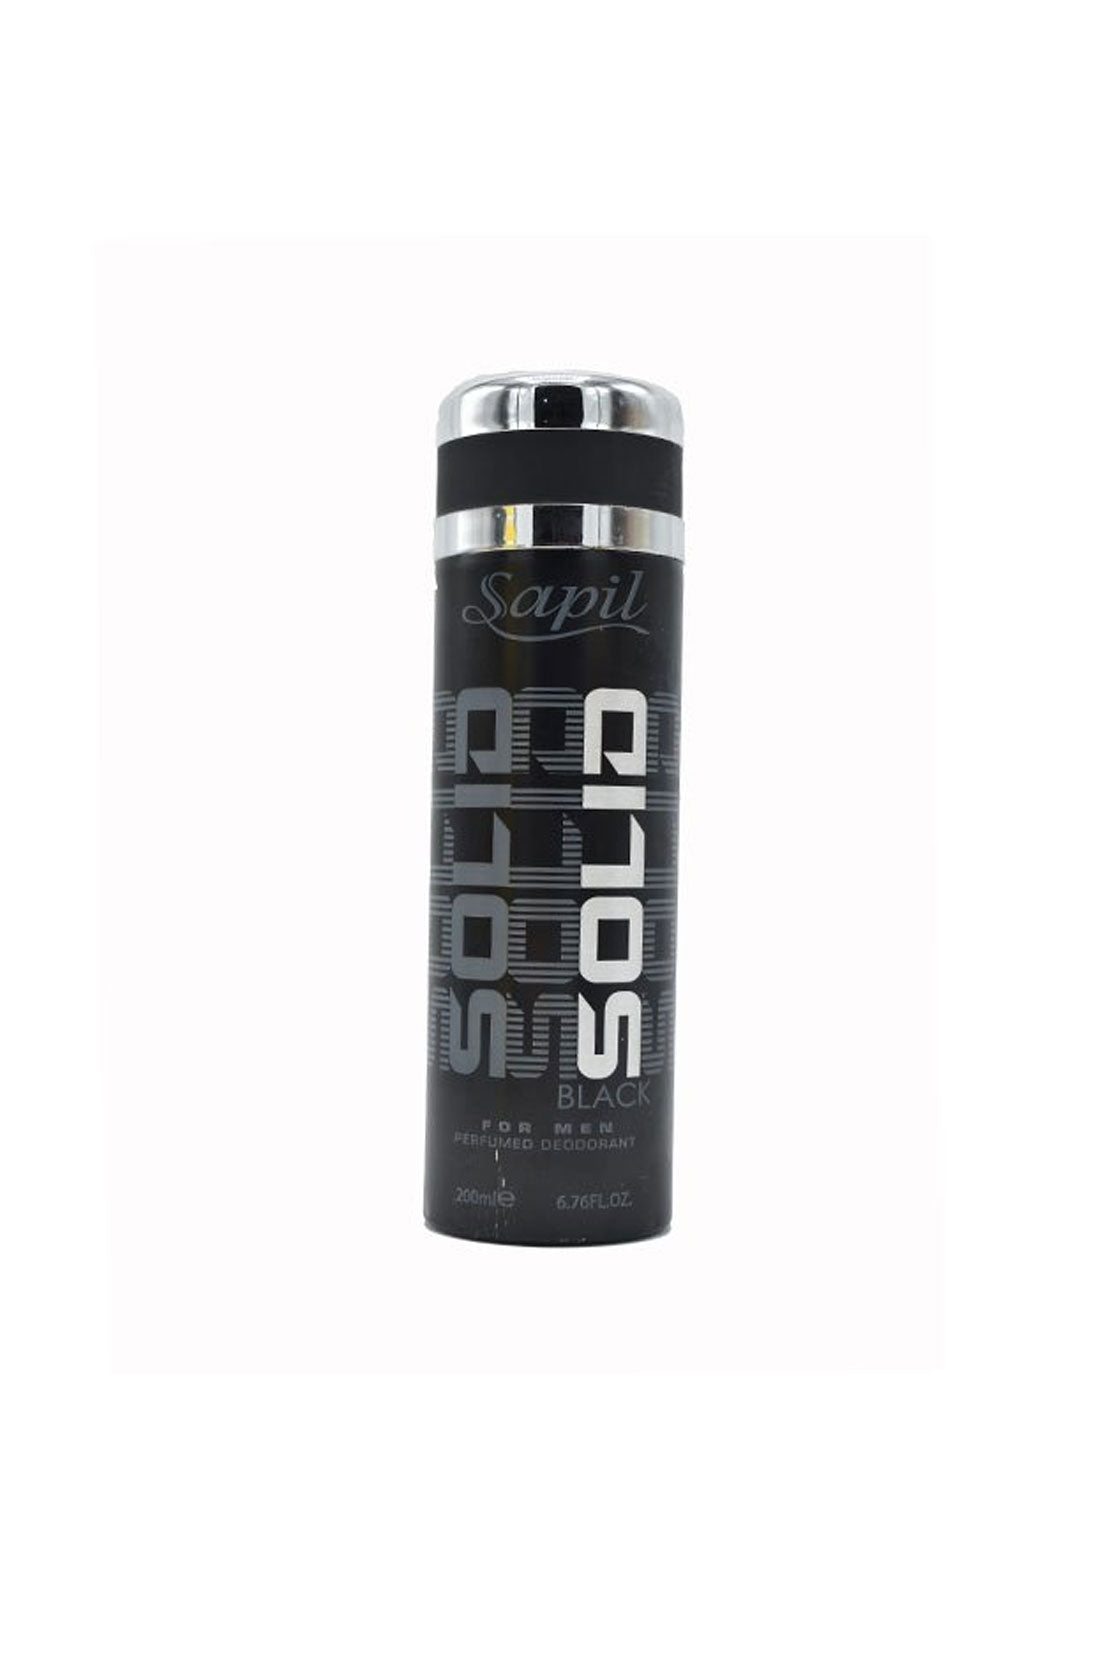 Solid Black Body Spary For Men 200ml RIOS